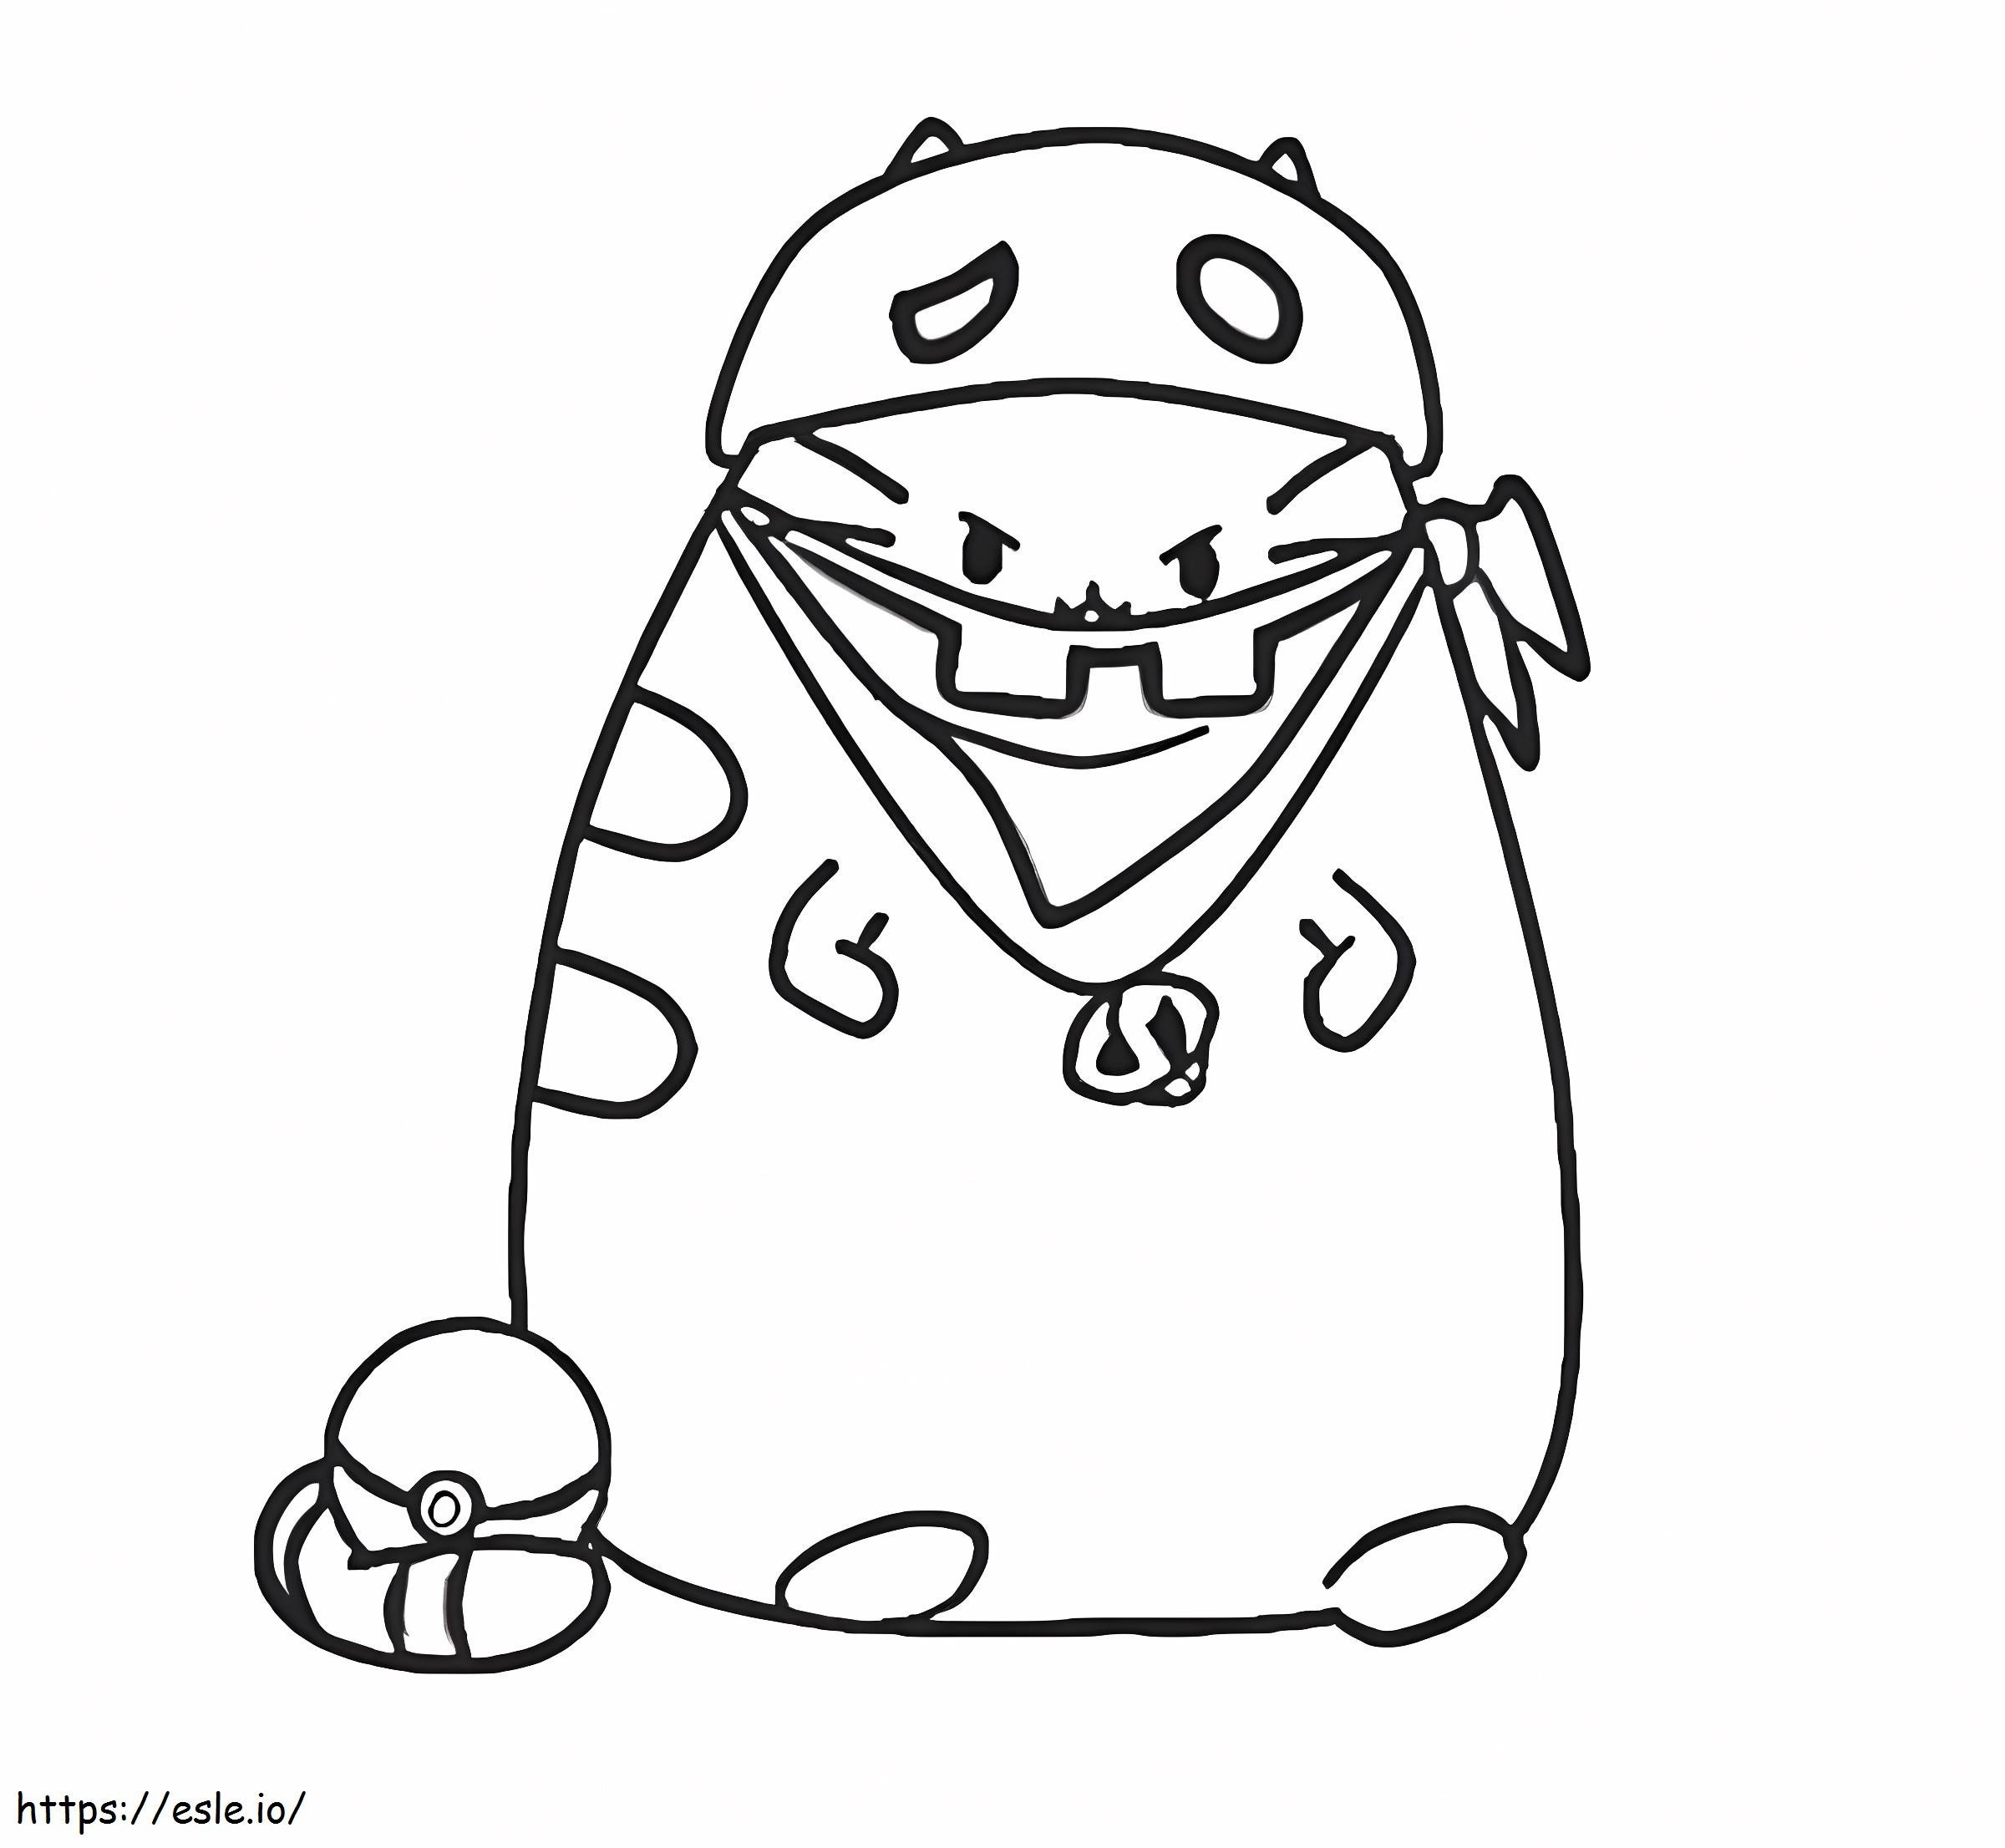 Pusheen A Halloween coloring page